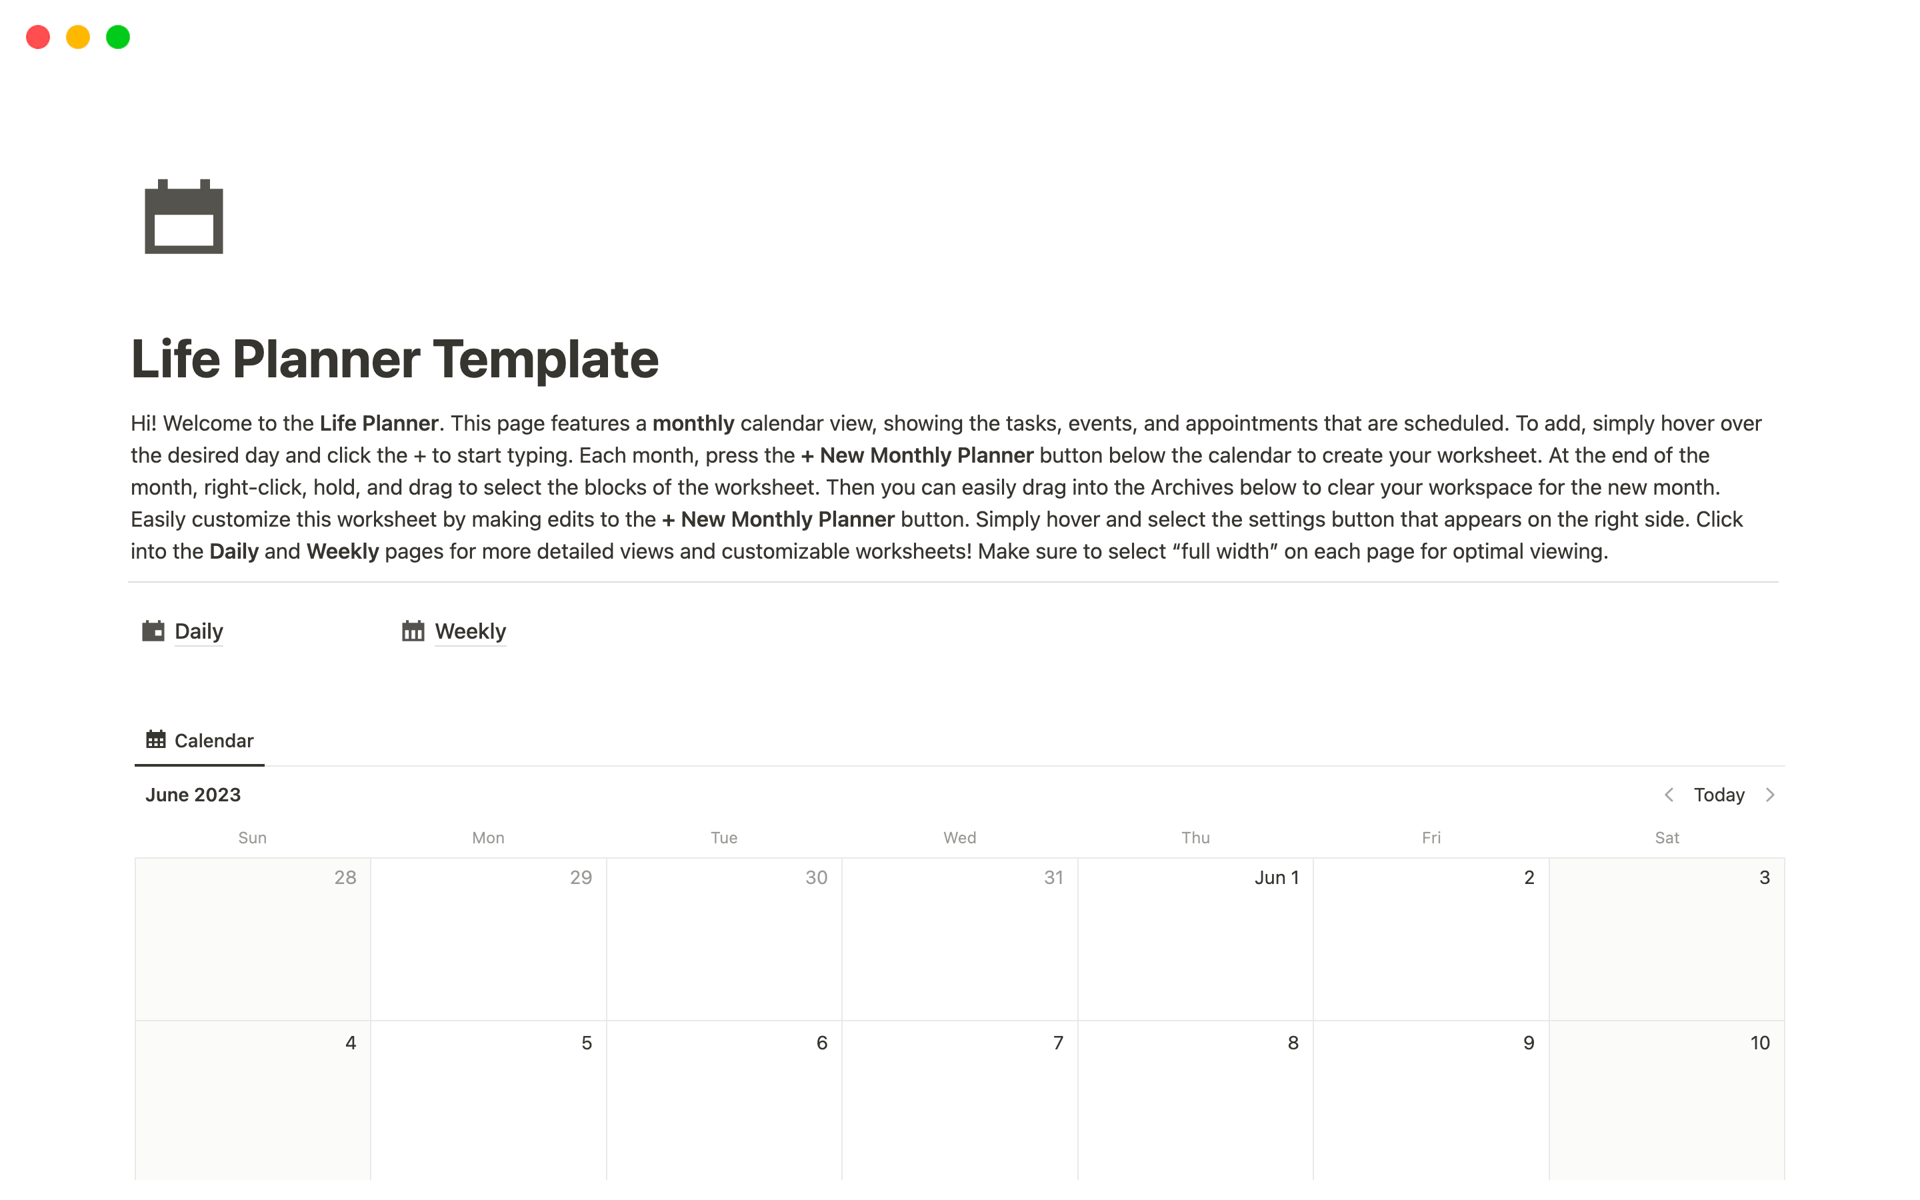 This template will help you stay organized while managing your time and productivity!